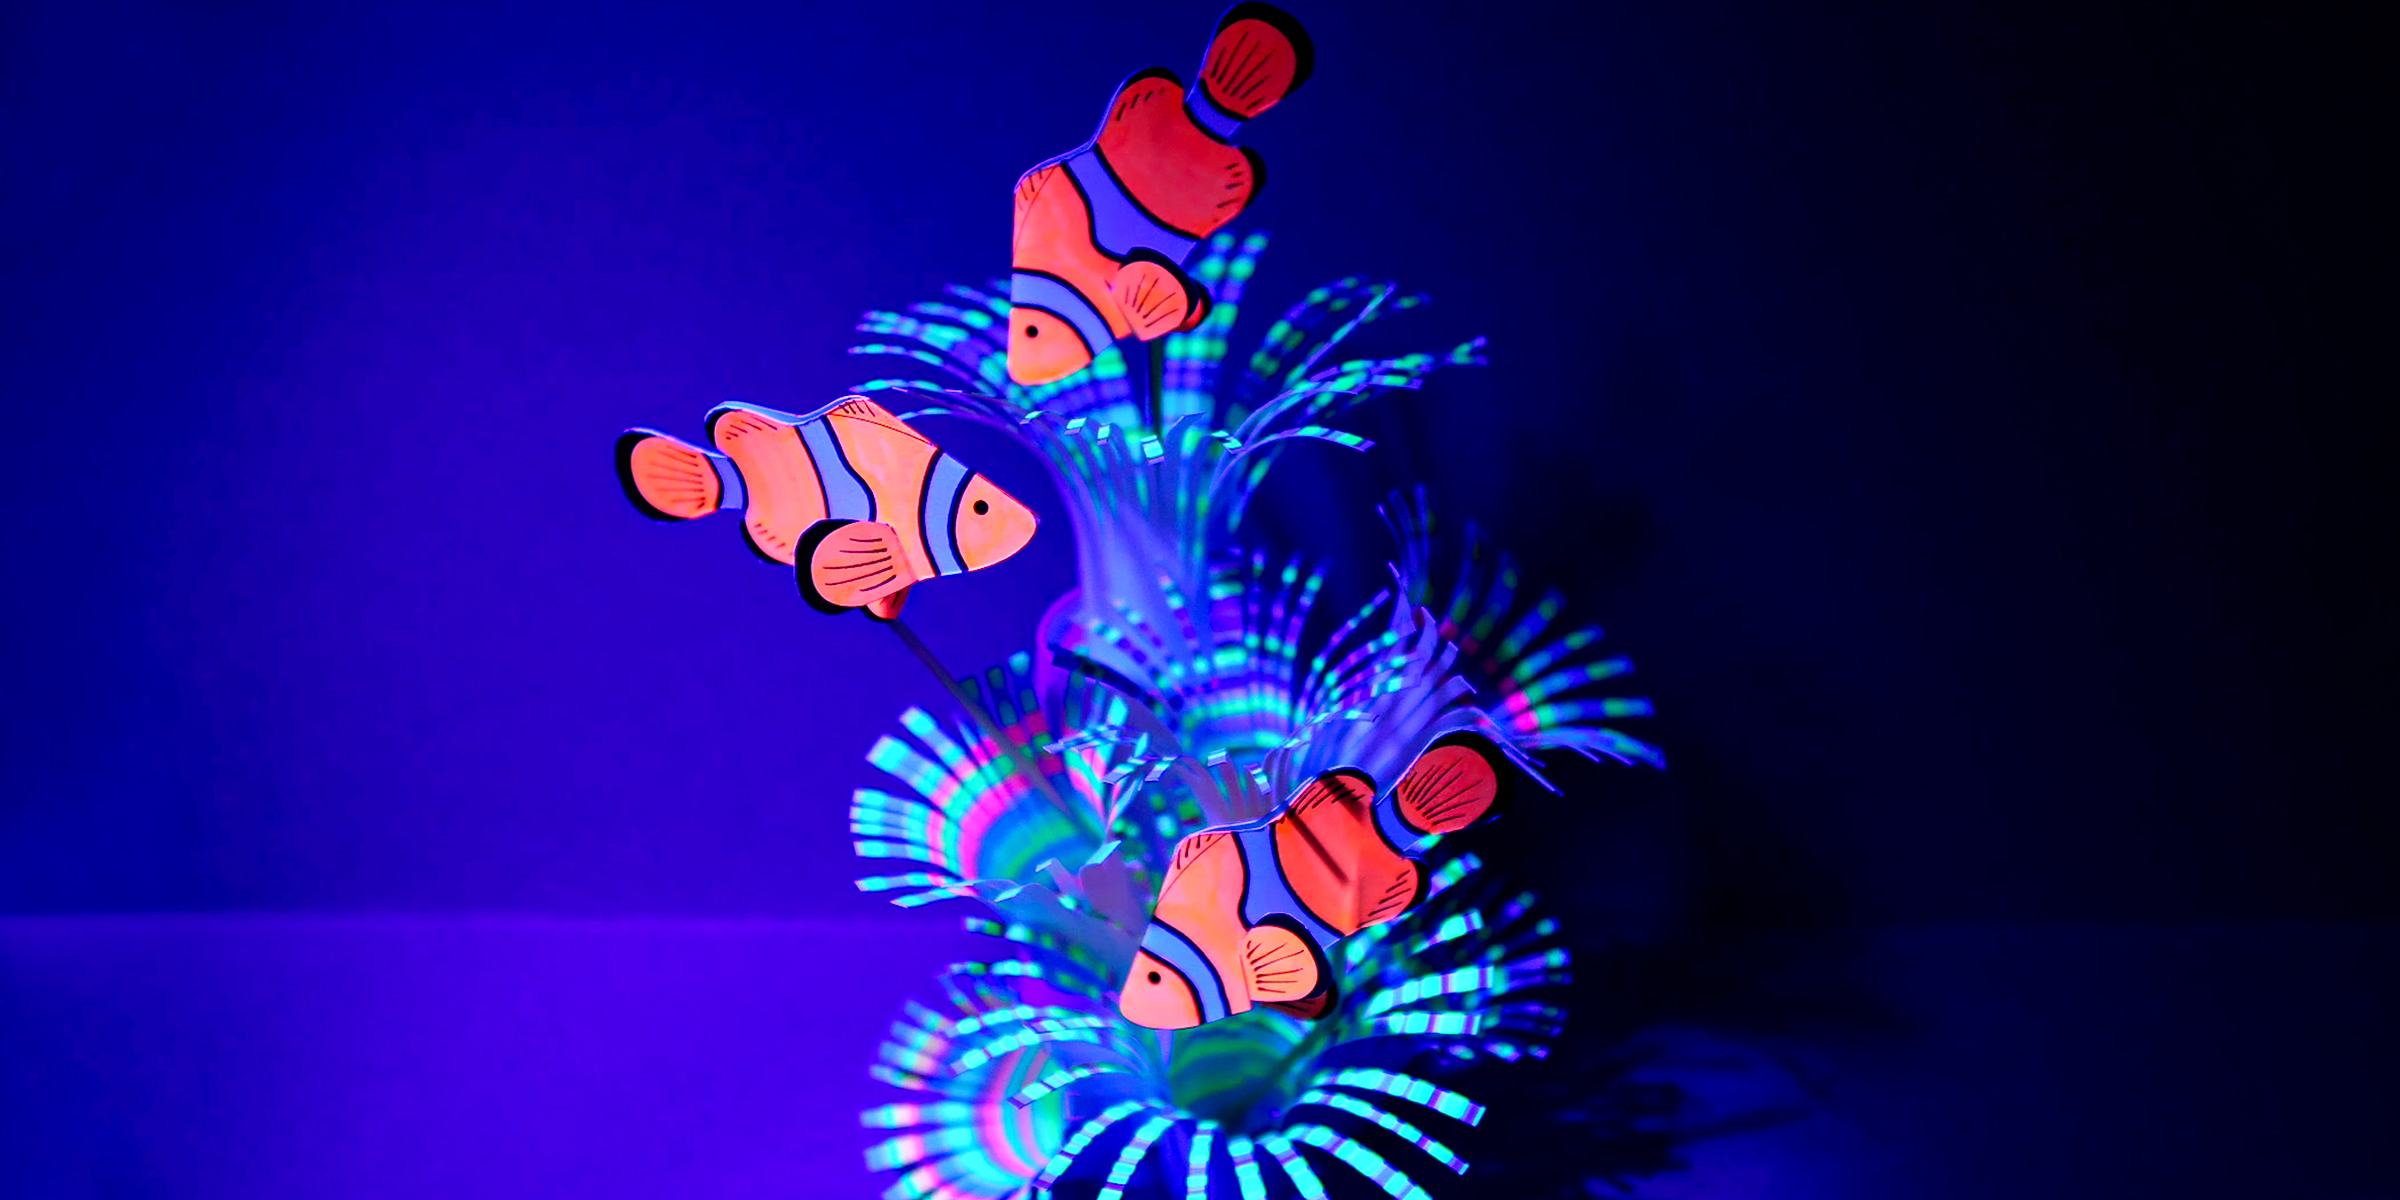 A paper craft inspired by coral reef and clownfish | Source: YouTube/diydesigner5766